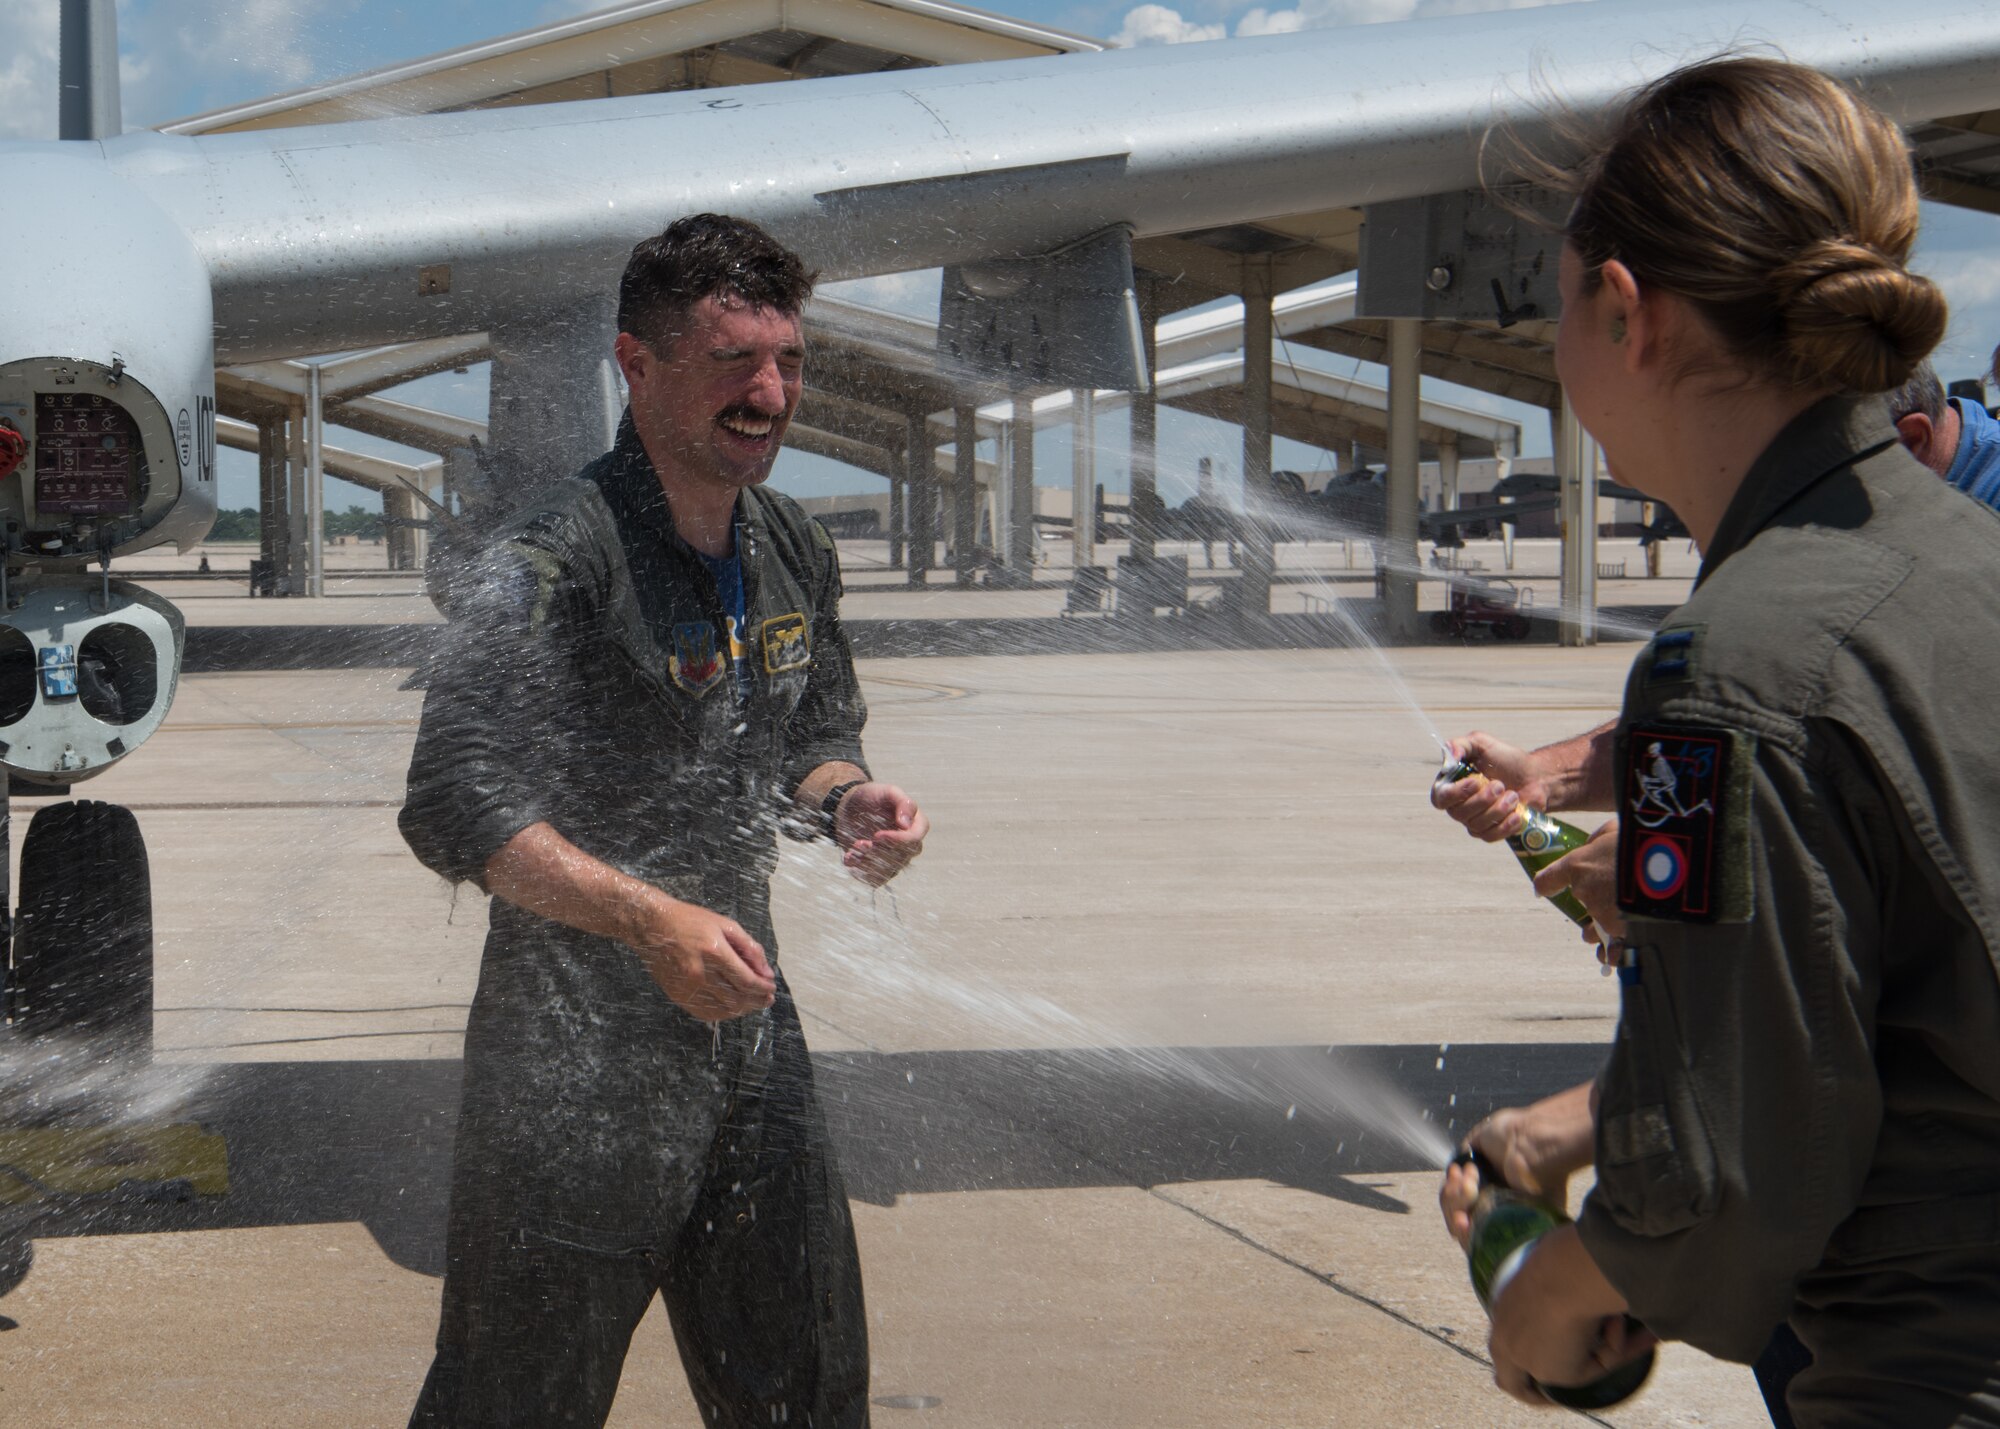 Capt. Lacey Orians sprays her husband Capt Stephen Orians with water and Champagne in front of his A-10 Thunderbolt II.